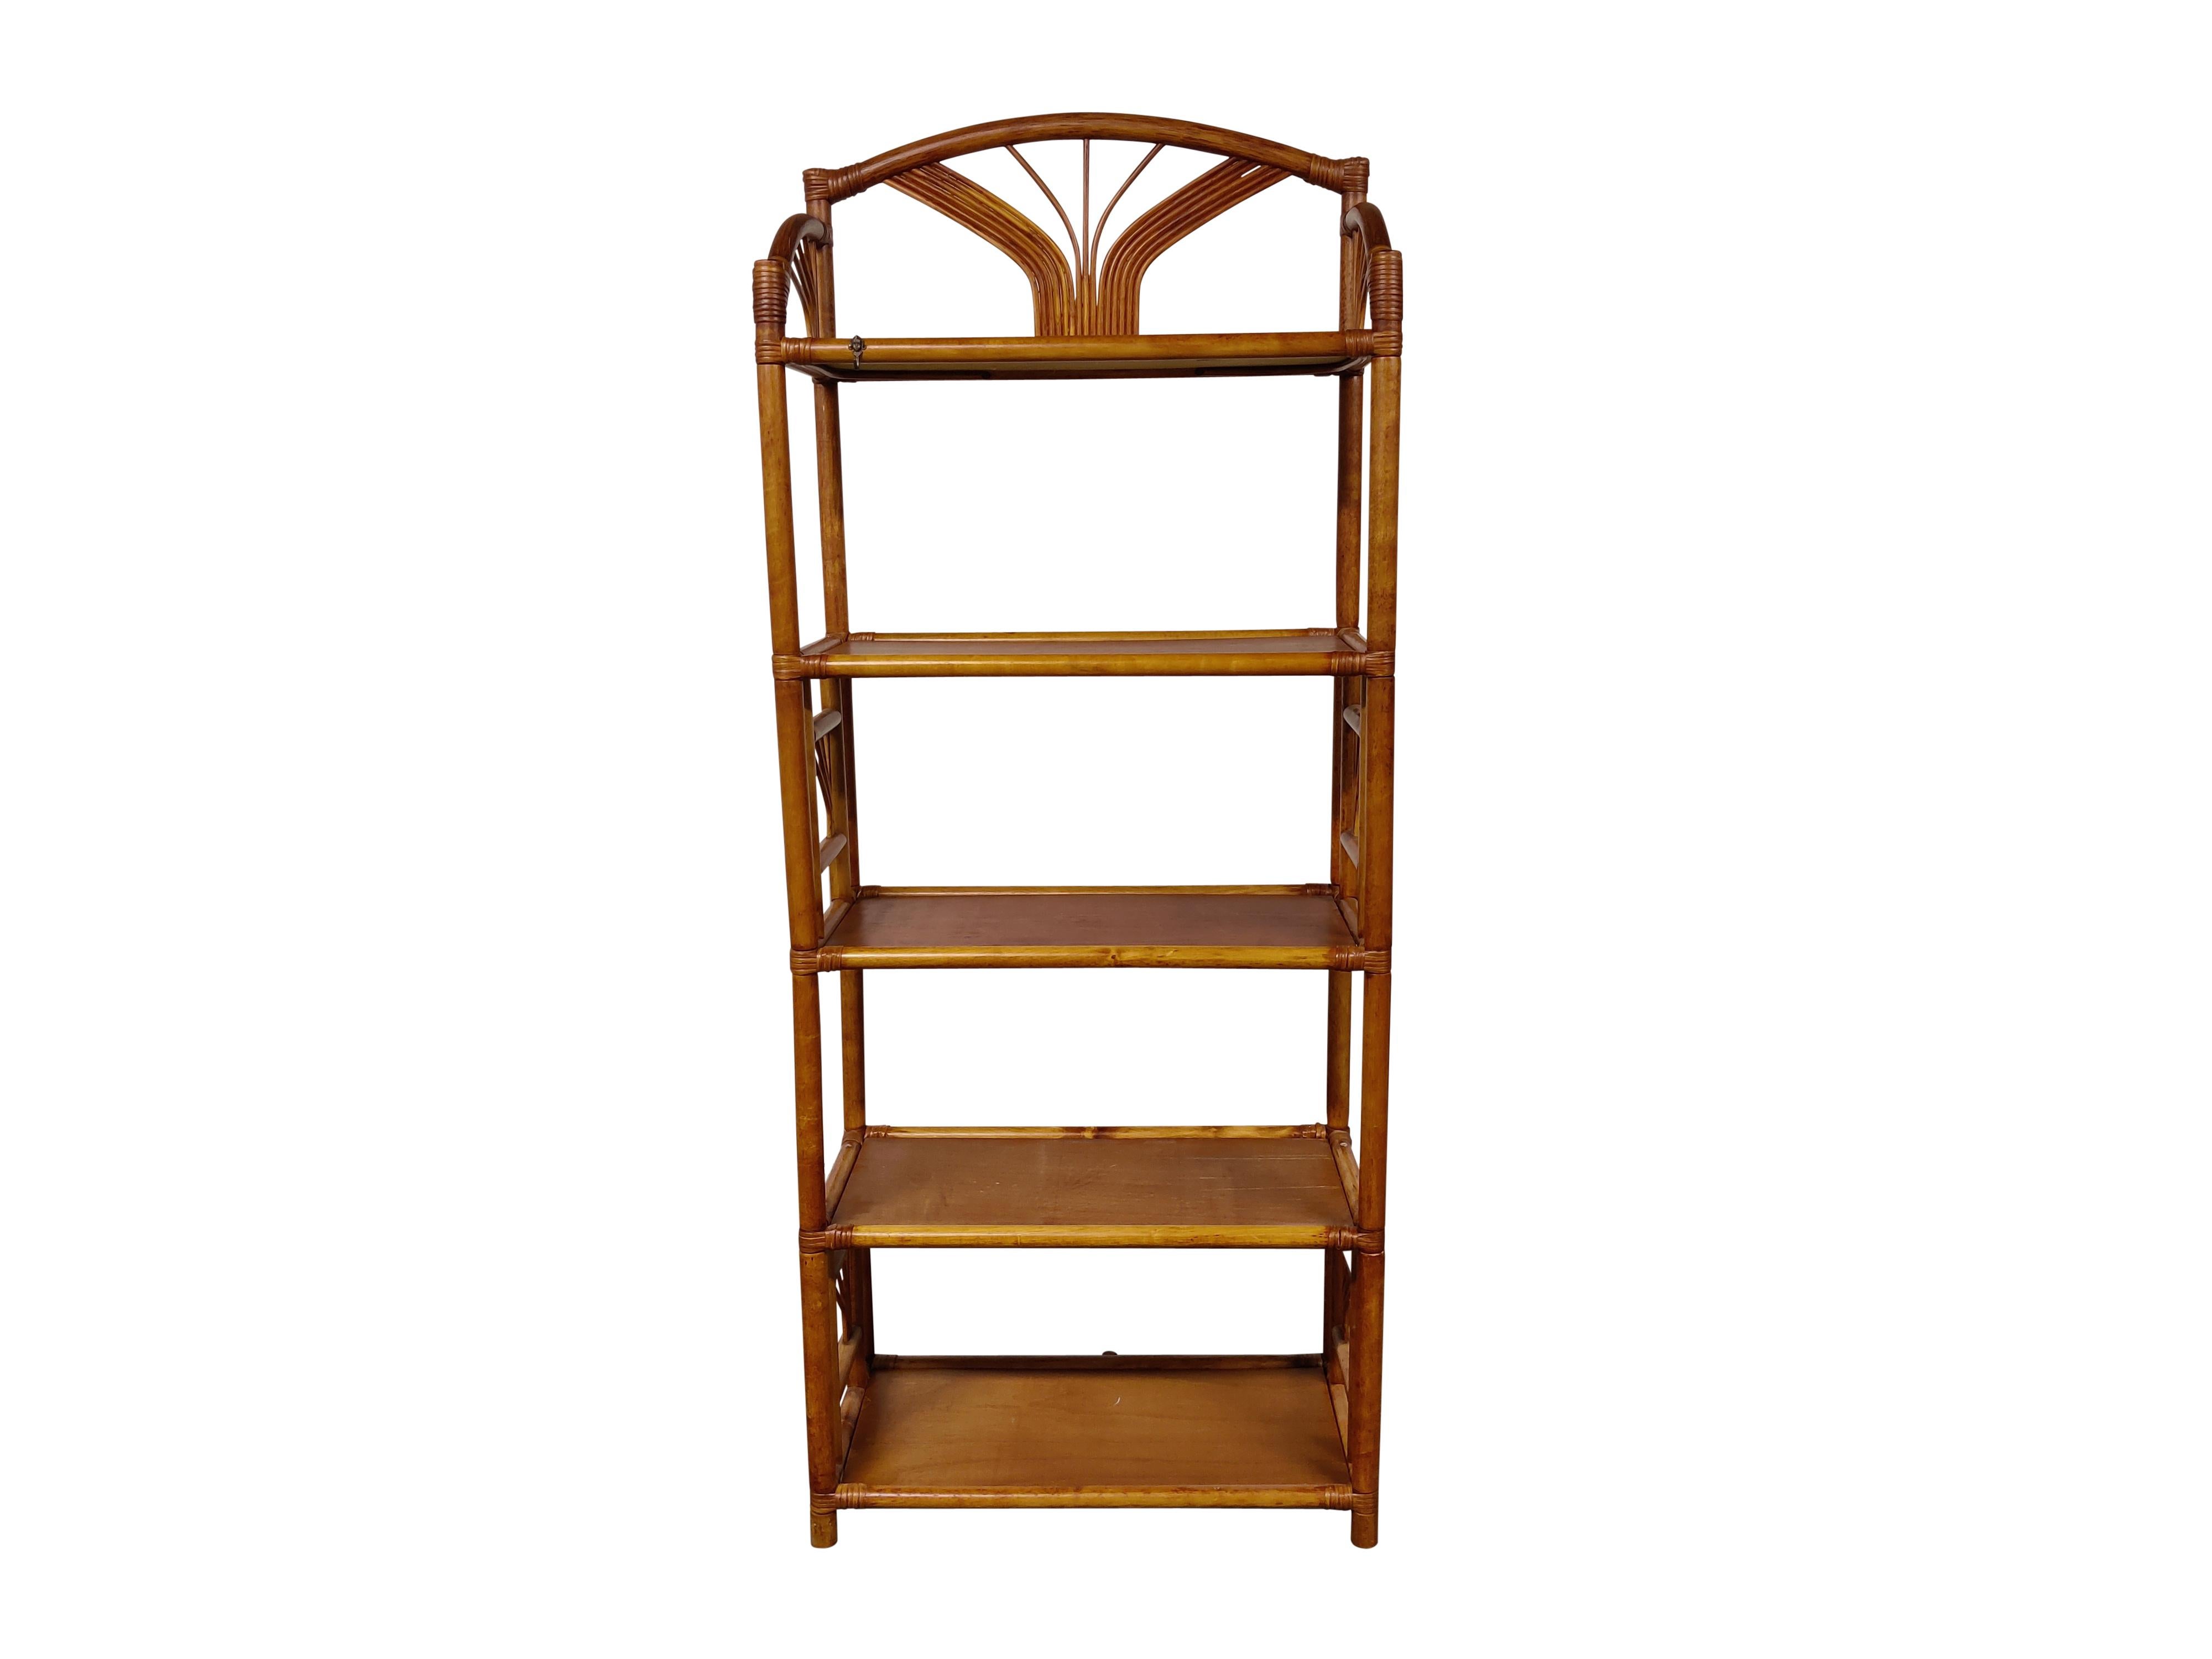 Mid century bamboo bookcase.

Beautiful design which fits in with most interiors.

Bohemian style. 

1960s - France

Dimensions:
Height: 185cm/72.83